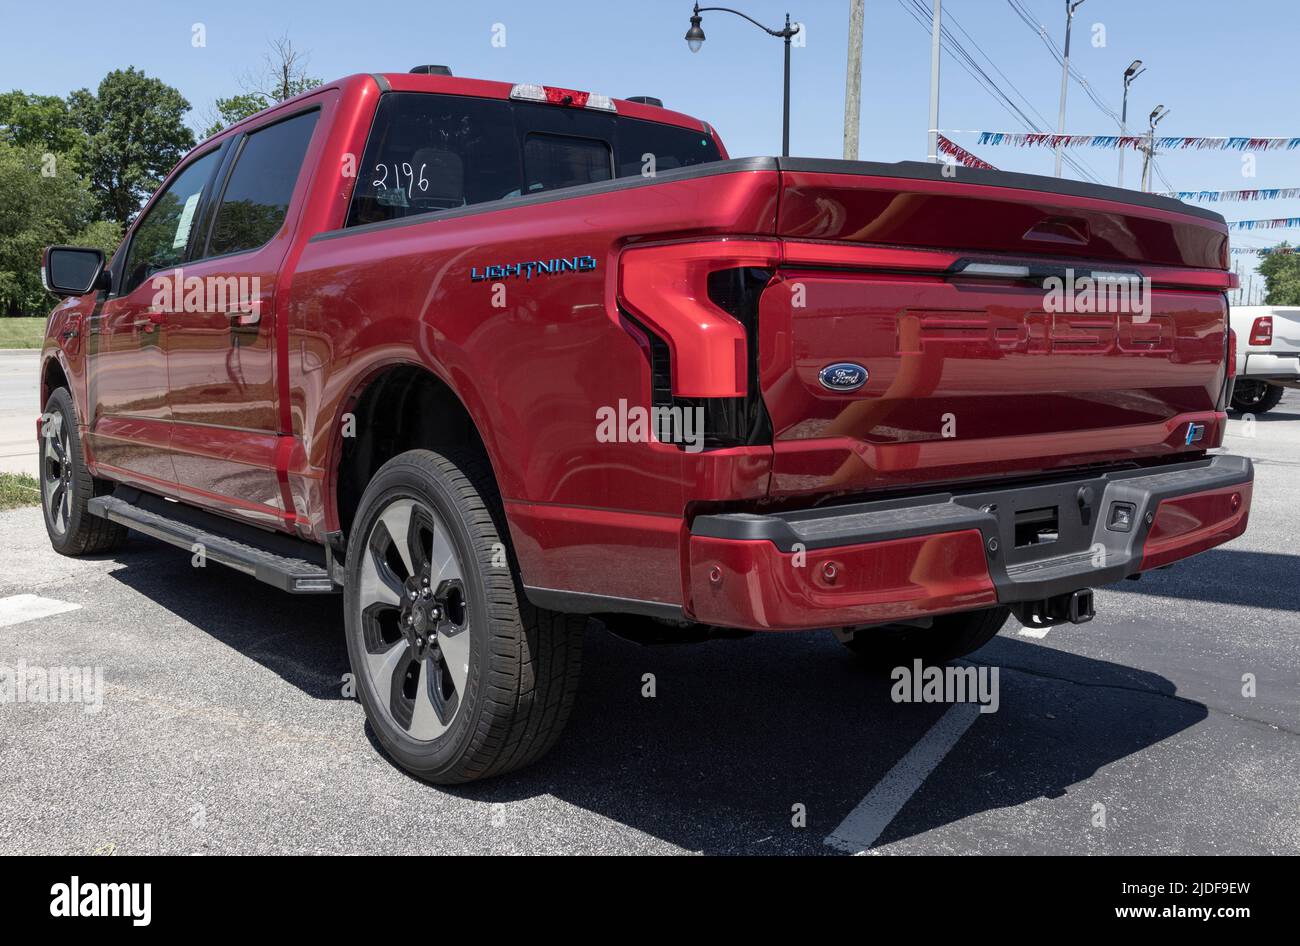 Lebanon - Circa June 2022: Ford F-150 Lightning display. Ford offers the F150 Lightning all-electric truck in Pro, XLT, Lariat, and Platinum models. Stock Photo